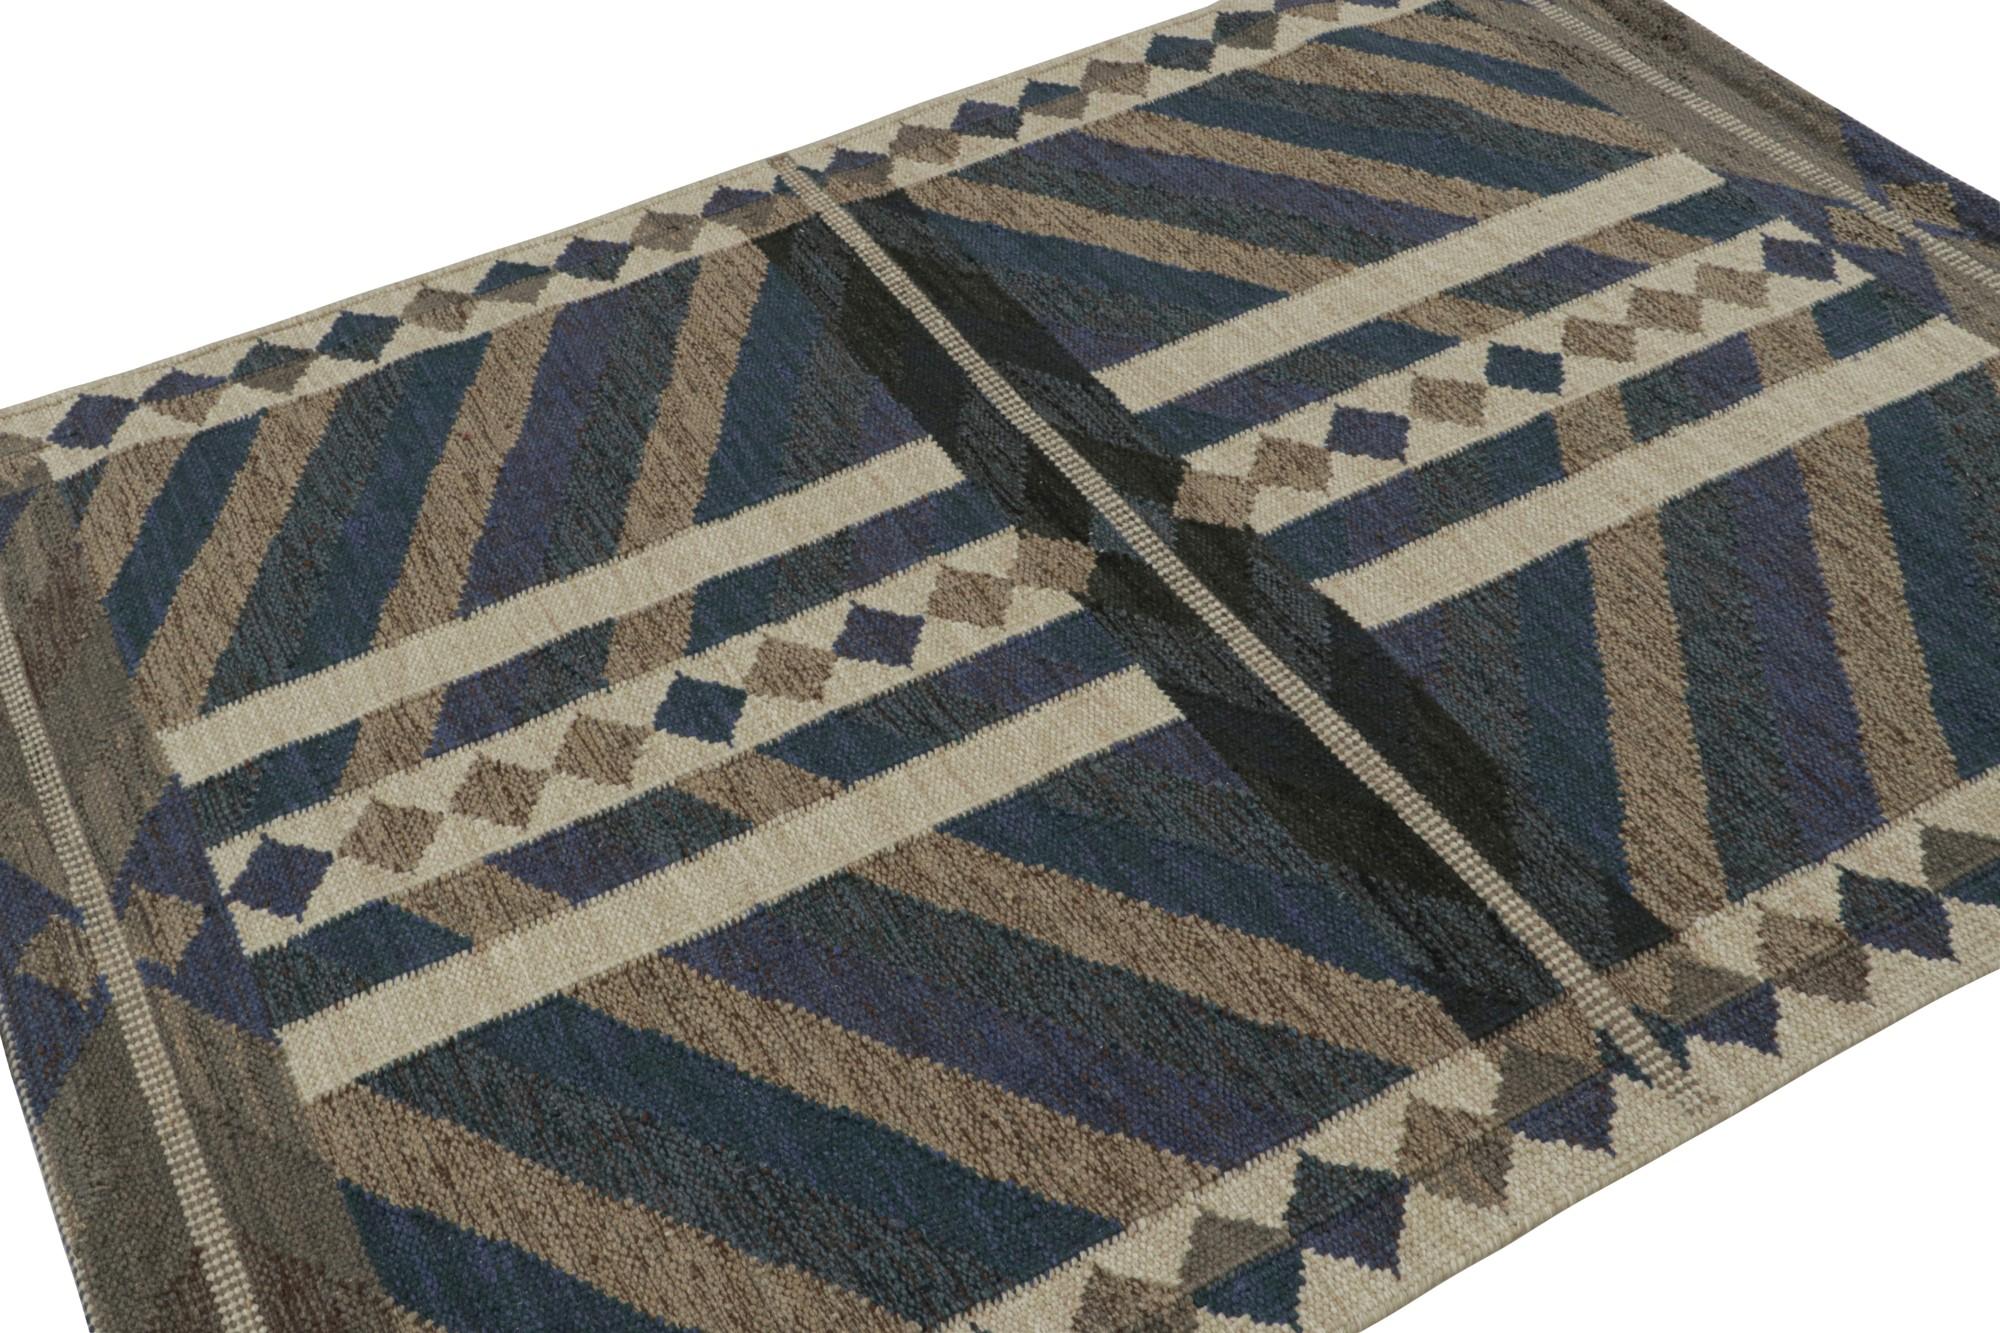 A smart 5x7 Swedish kilim from our award-winning Scandinavian flat weave collection. Handwoven in wool & undyed natural yarns.

On the Design: 

This rug enjoys blue and beige geometric patterns in one of the more architectural Swedish Deco styles.